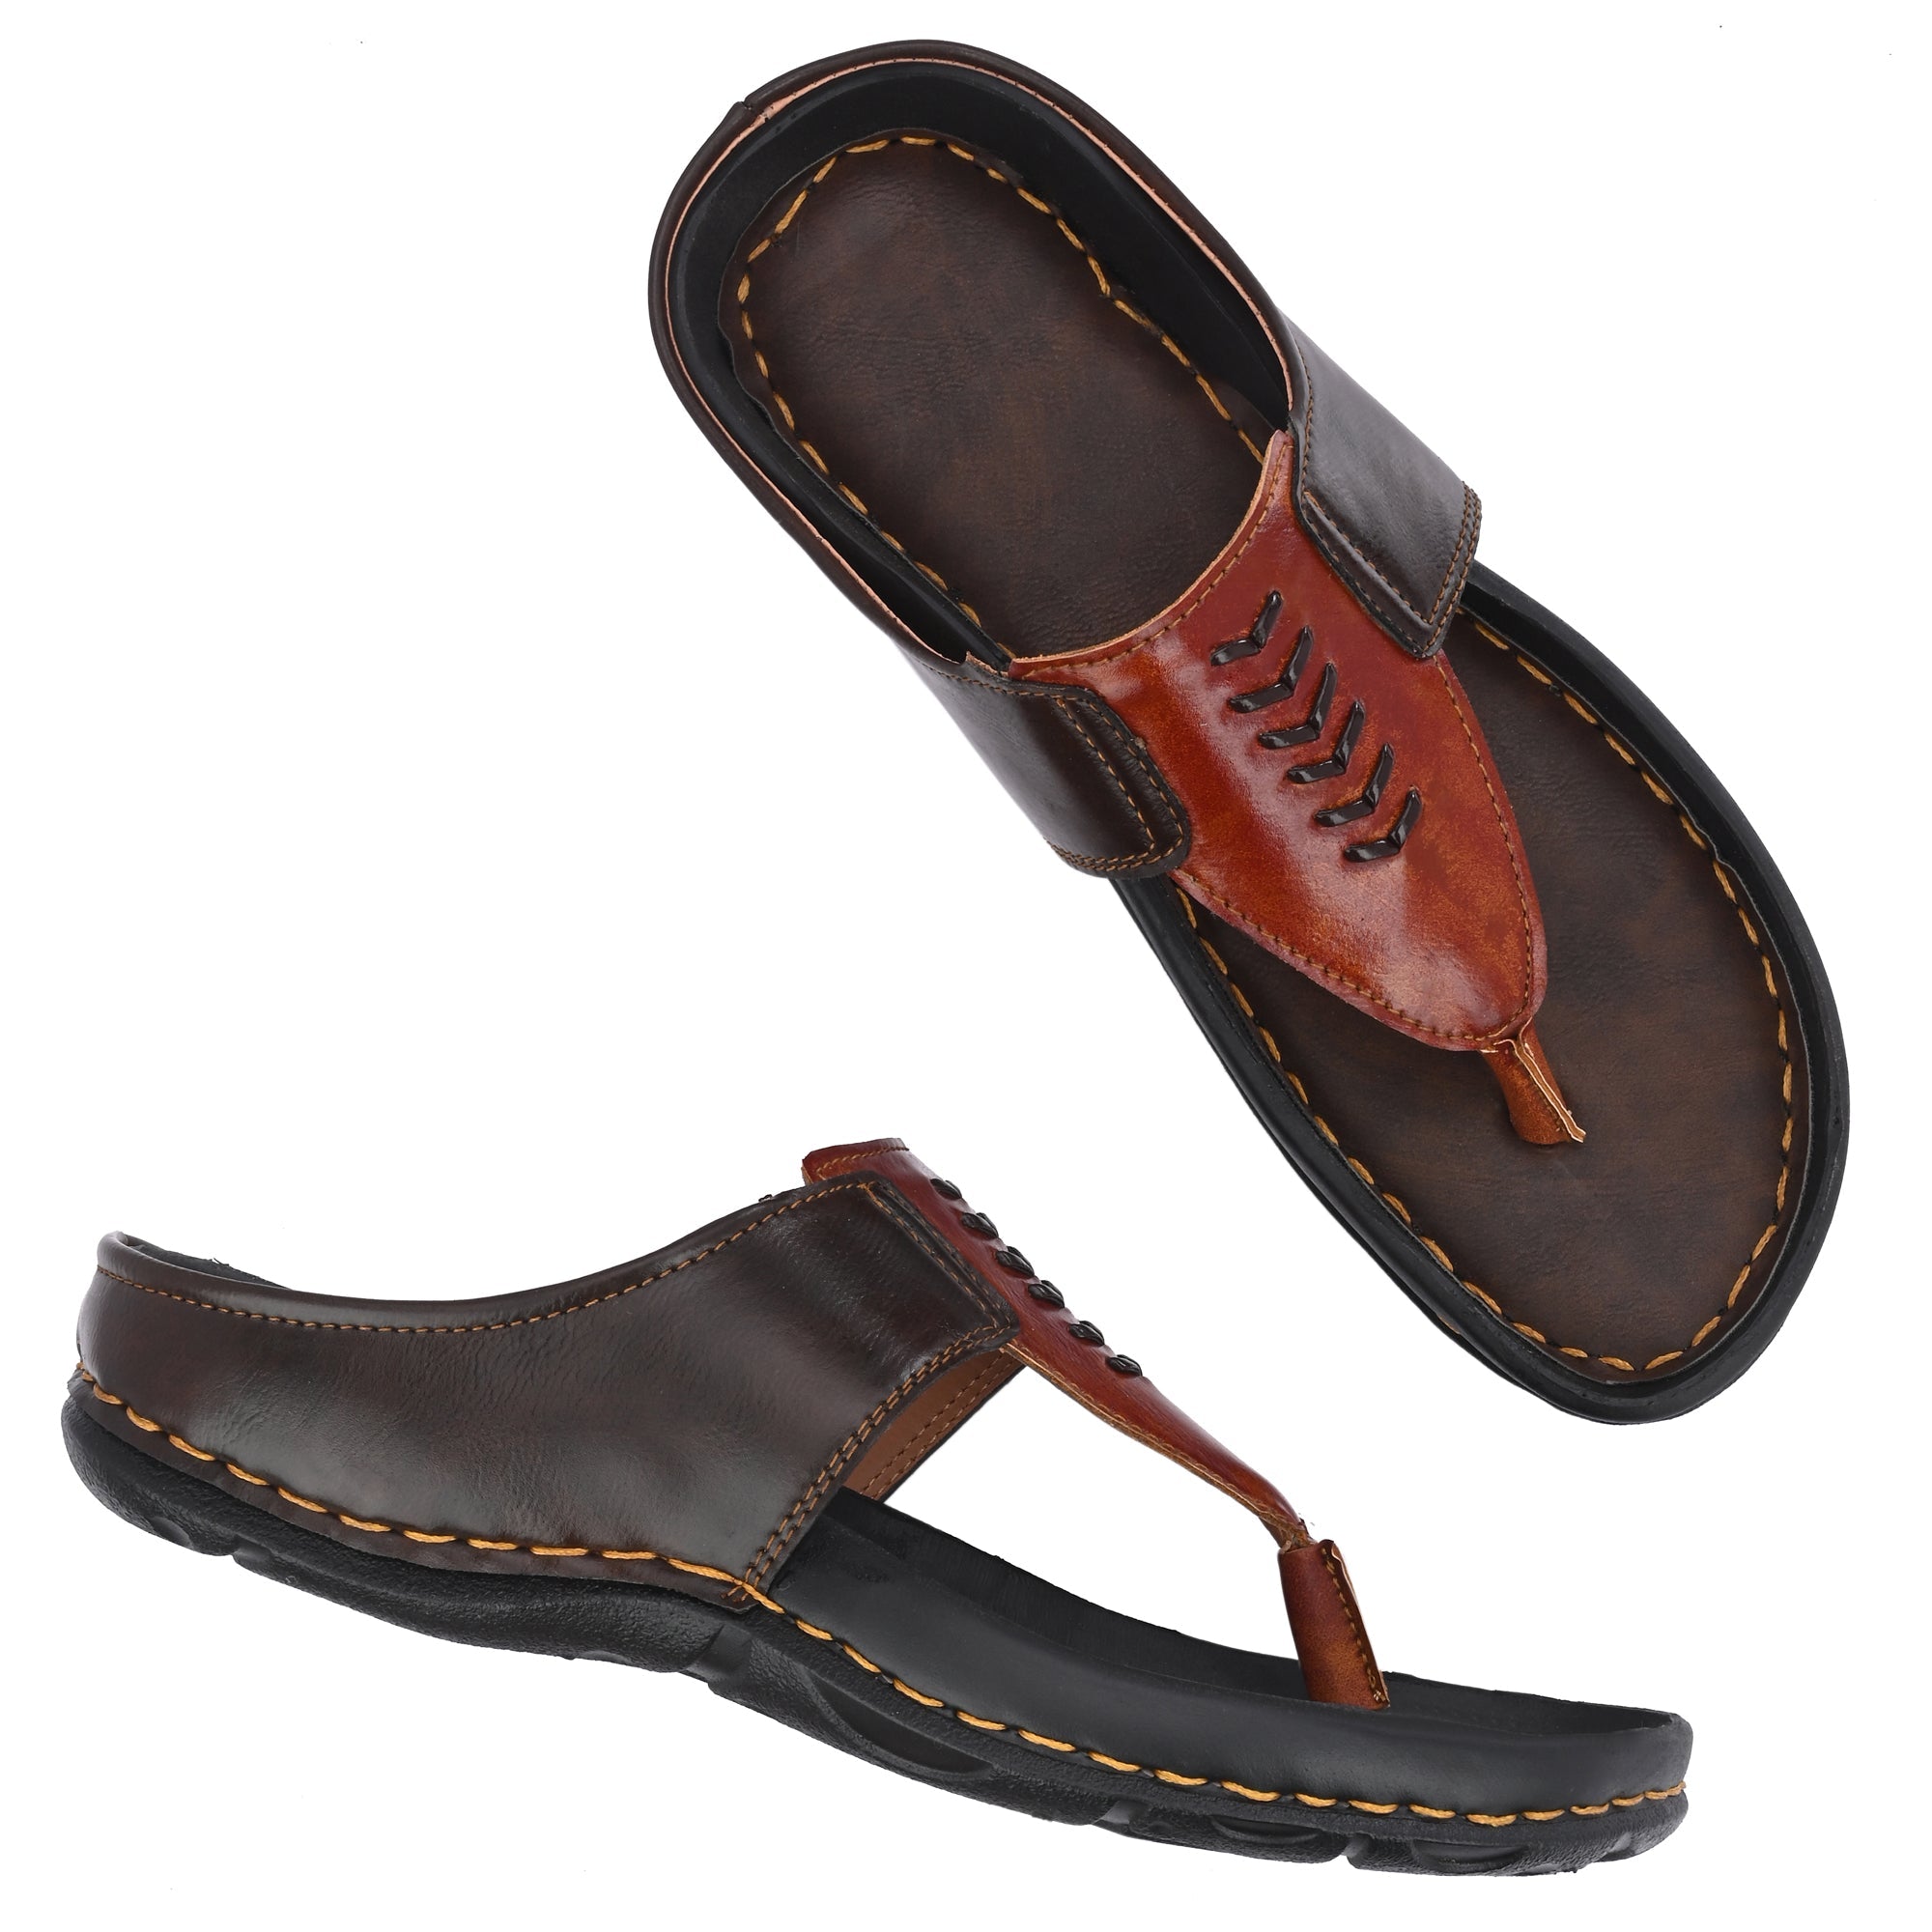 Attitudist Handcrafted Brown Leather Slippers For Men